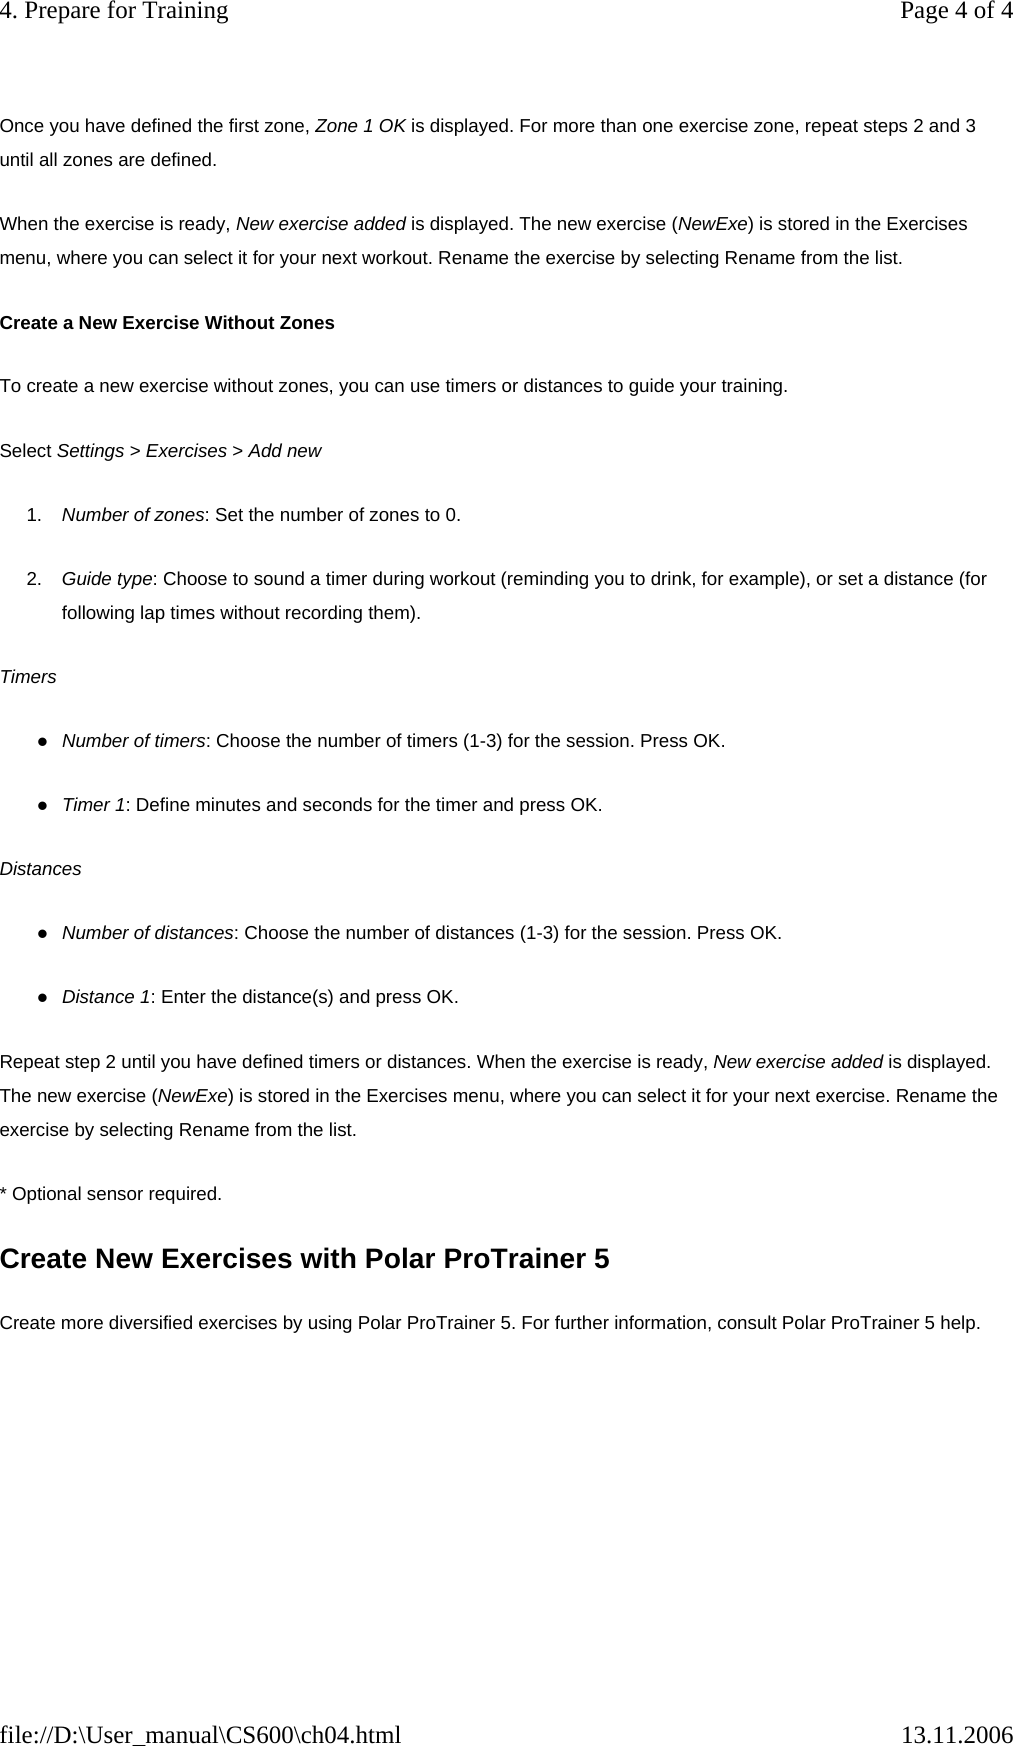 Once you have defined the first zone, Zone 1 OK is displayed. For more than one exercise zone, repeat steps 2 and 3 until all zones are defined. When the exercise is ready, New exercise added is displayed. The new exercise (NewExe) is stored in the Exercises menu, where you can select it for your next workout. Rename the exercise by selecting Rename from the list.  Create a New Exercise Without Zones To create a new exercise without zones, you can use timers or distances to guide your training.  Select Settings &gt; Exercises &gt; Add new 1. Number of zones: Set the number of zones to 0. 2. Guide type: Choose to sound a timer during workout (reminding you to drink, for example), or set a distance (for following lap times without recording them). Timers zNumber of timers: Choose the number of timers (1-3) for the session. Press OK. zTimer 1: Define minutes and seconds for the timer and press OK.  Distances zNumber of distances: Choose the number of distances (1-3) for the session. Press OK. zDistance 1: Enter the distance(s) and press OK. Repeat step 2 until you have defined timers or distances. When the exercise is ready, New exercise added is displayed. The new exercise (NewExe) is stored in the Exercises menu, where you can select it for your next exercise. Rename the exercise by selecting Rename from the list.  * Optional sensor required. Create New Exercises with Polar ProTrainer 5 Create more diversified exercises by using Polar ProTrainer 5. For further information, consult Polar ProTrainer 5 help.   Page 4 of 44. Prepare for Training13.11.2006file://D:\User_manual\CS600\ch04.html